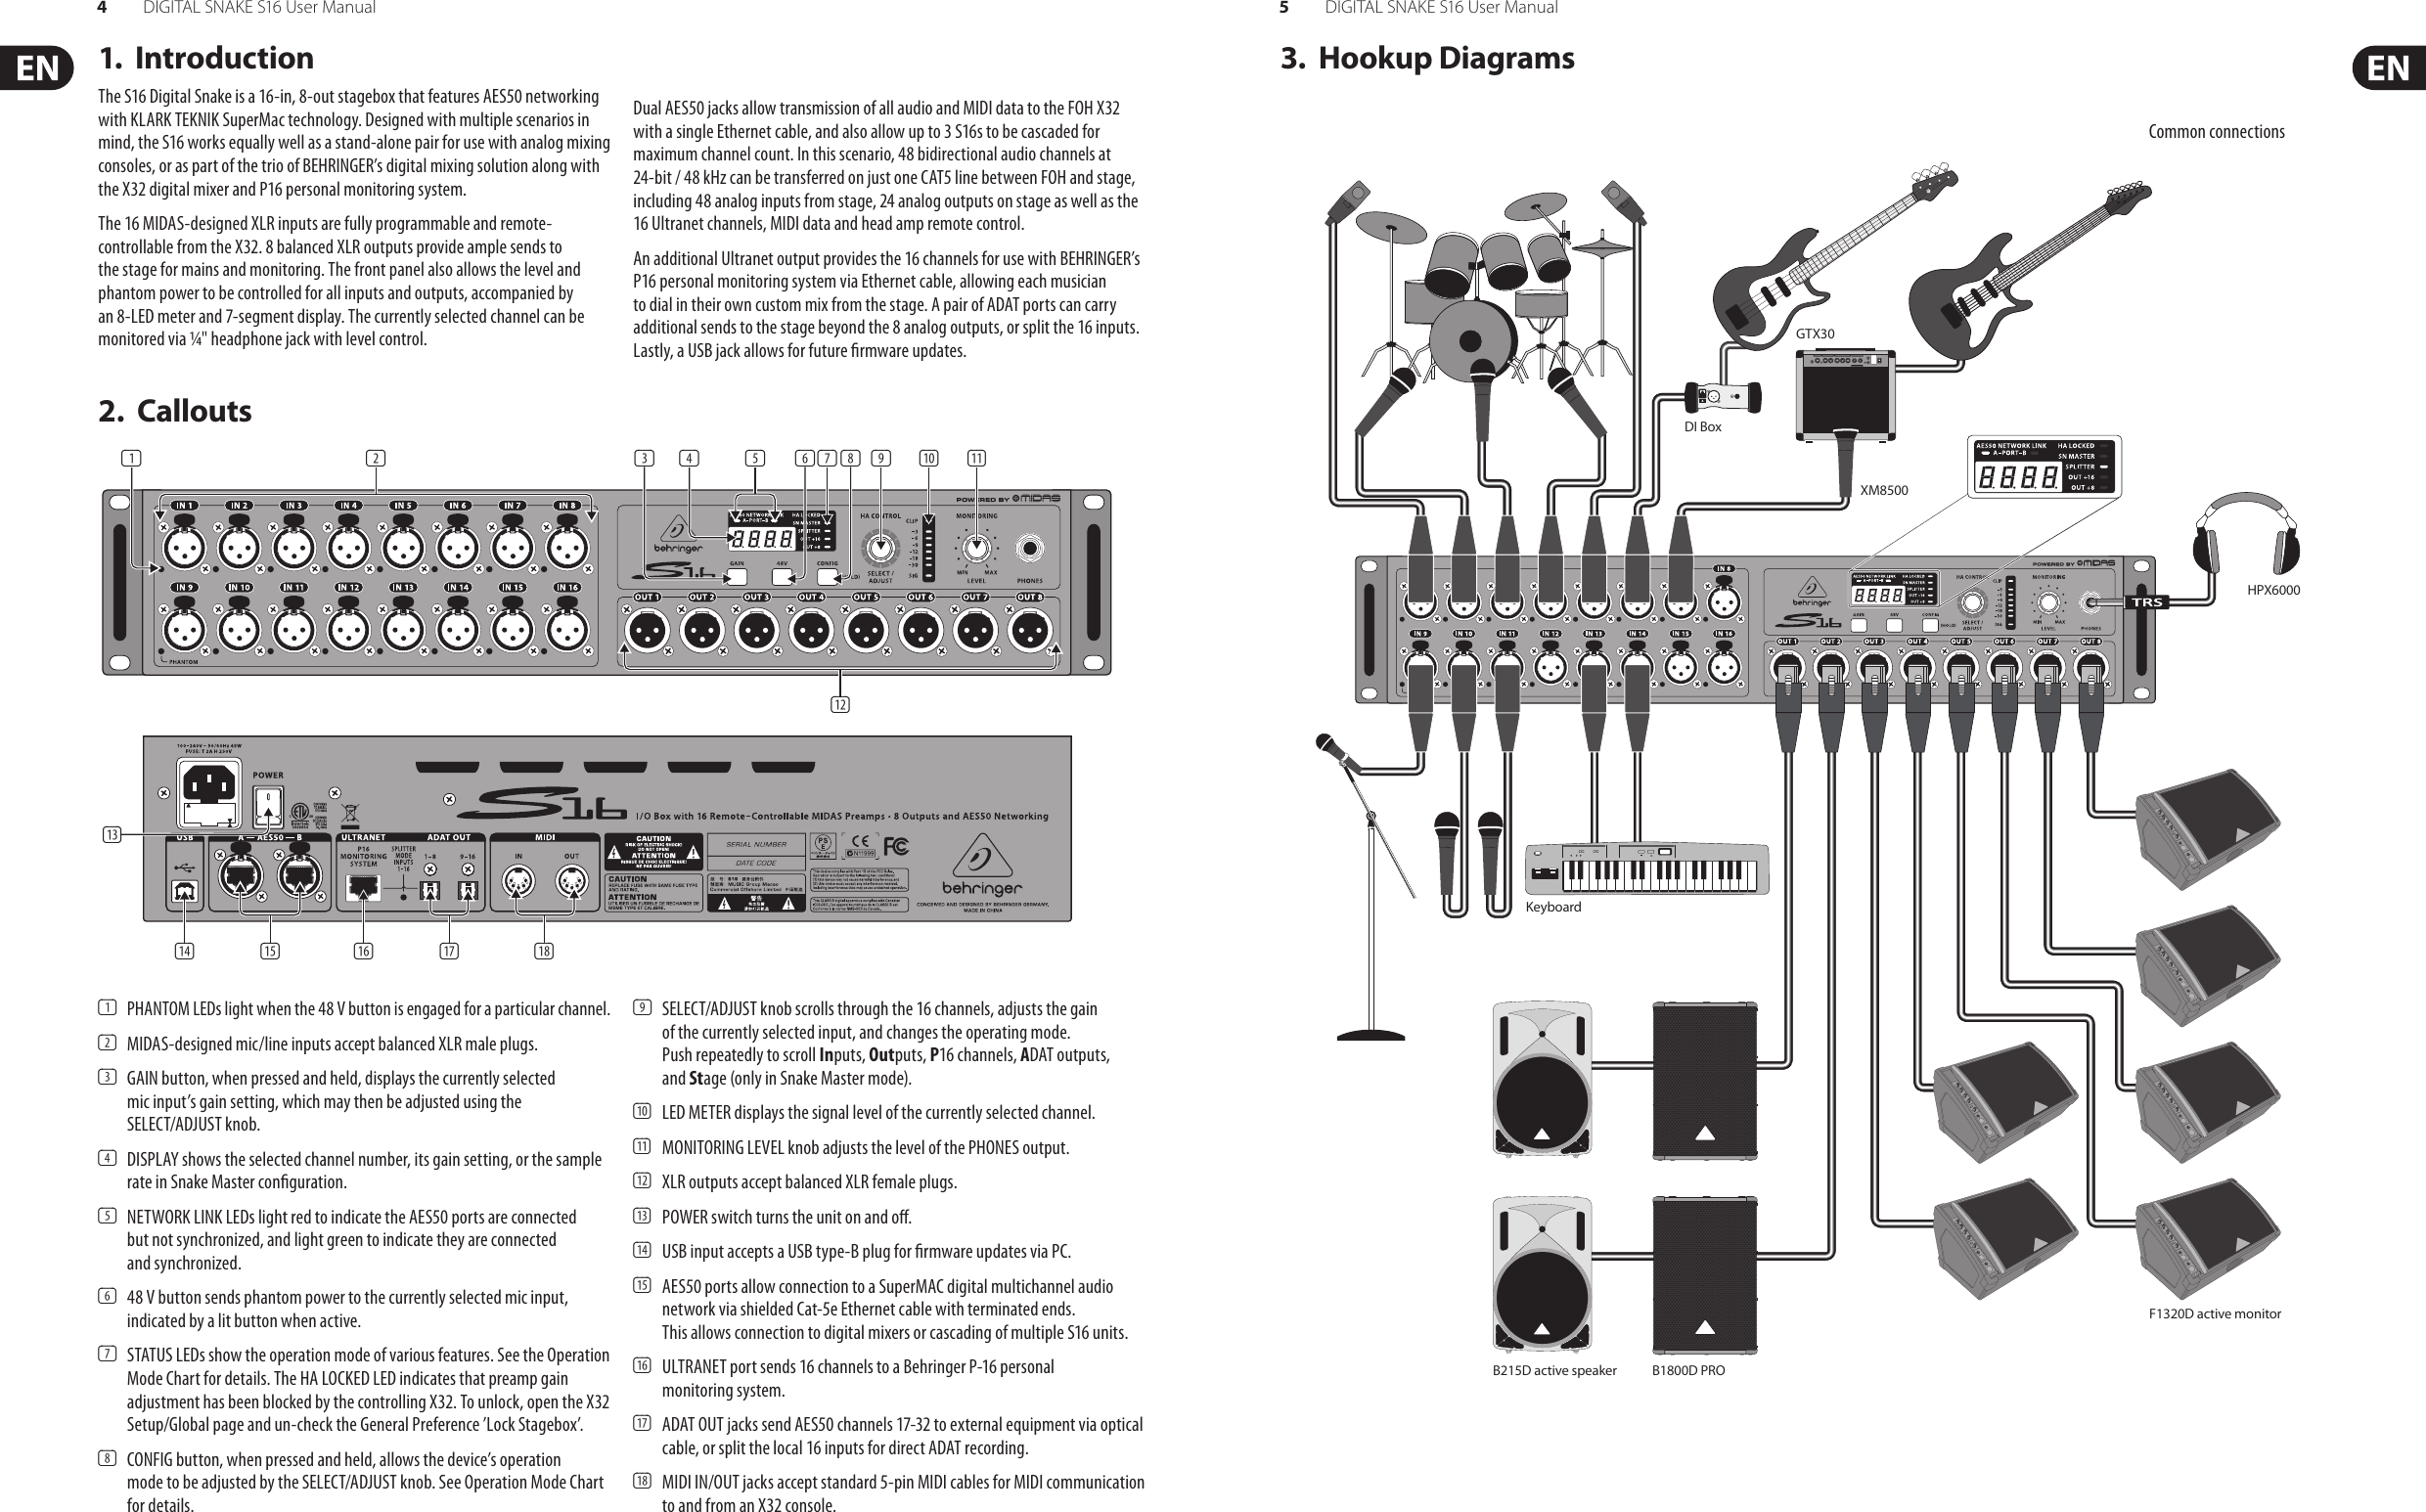 Page 3 of 9 - Behringer Behringer-S16-Users-Manual- DIGITAL SNAKE S16  Behringer-s16-users-manual